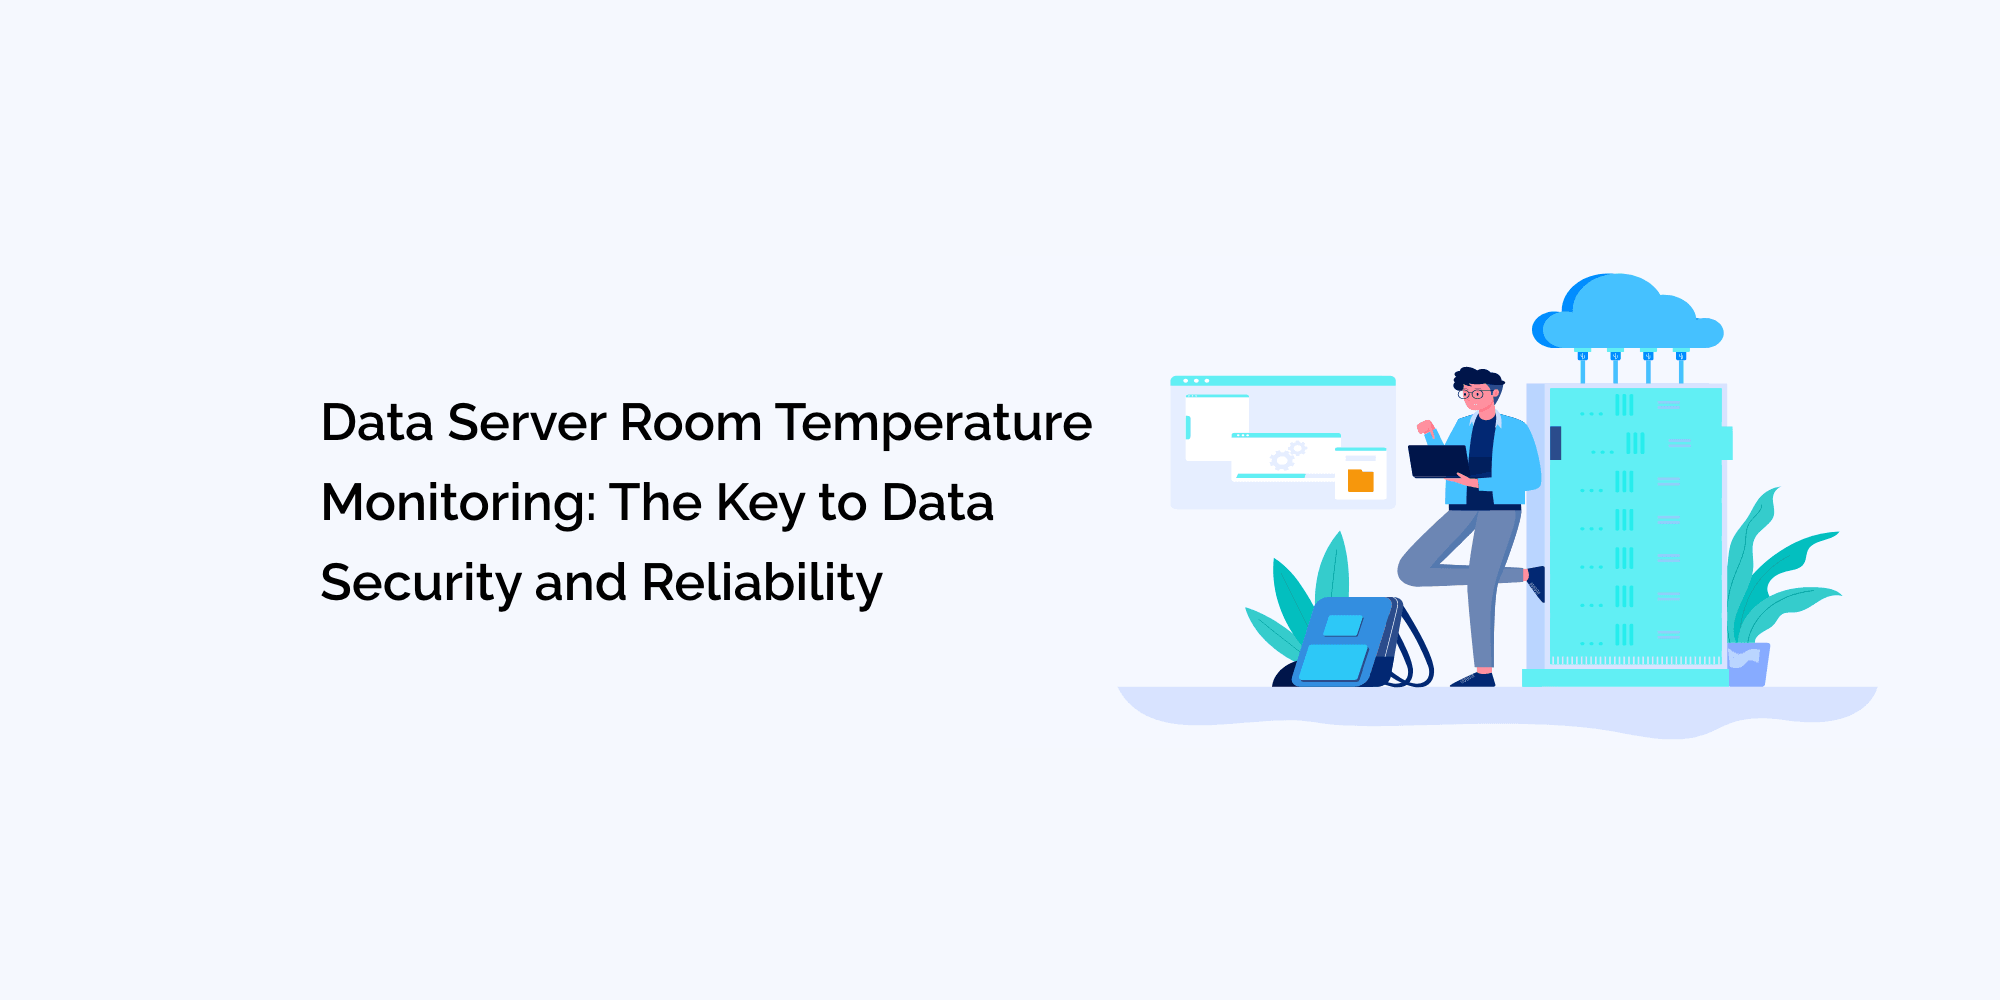 Data Server Room Temperature Monitoring: The Key to Data Security and Reliability